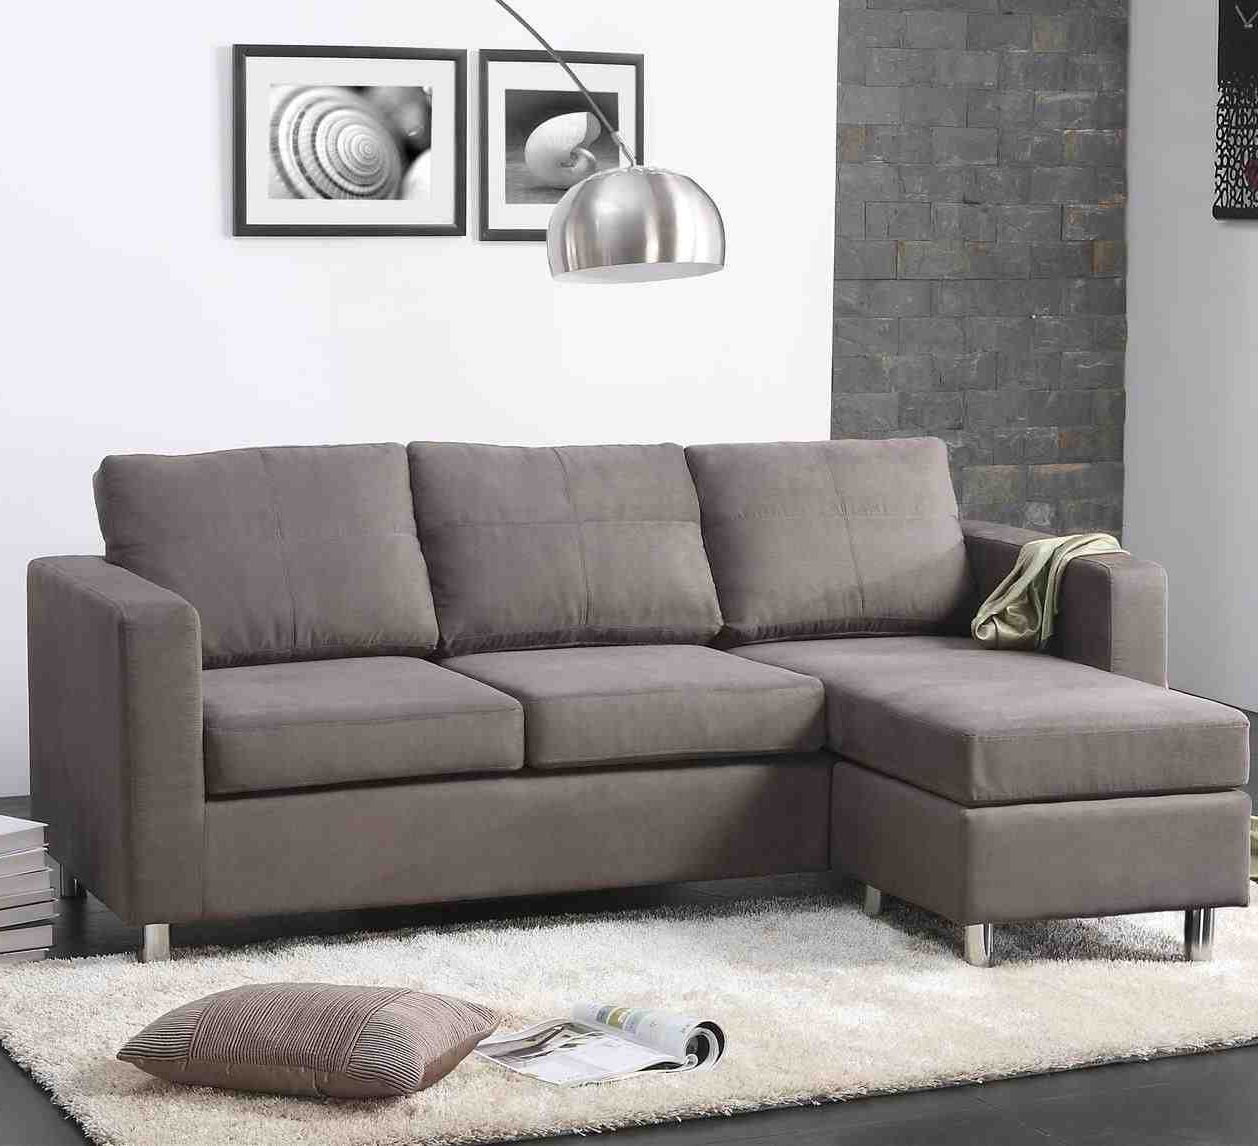 Small L Shaped Sectional Sofa – Home Furniture Design Within Small L Shaped Sectional Sofas In Beige (View 12 of 20)